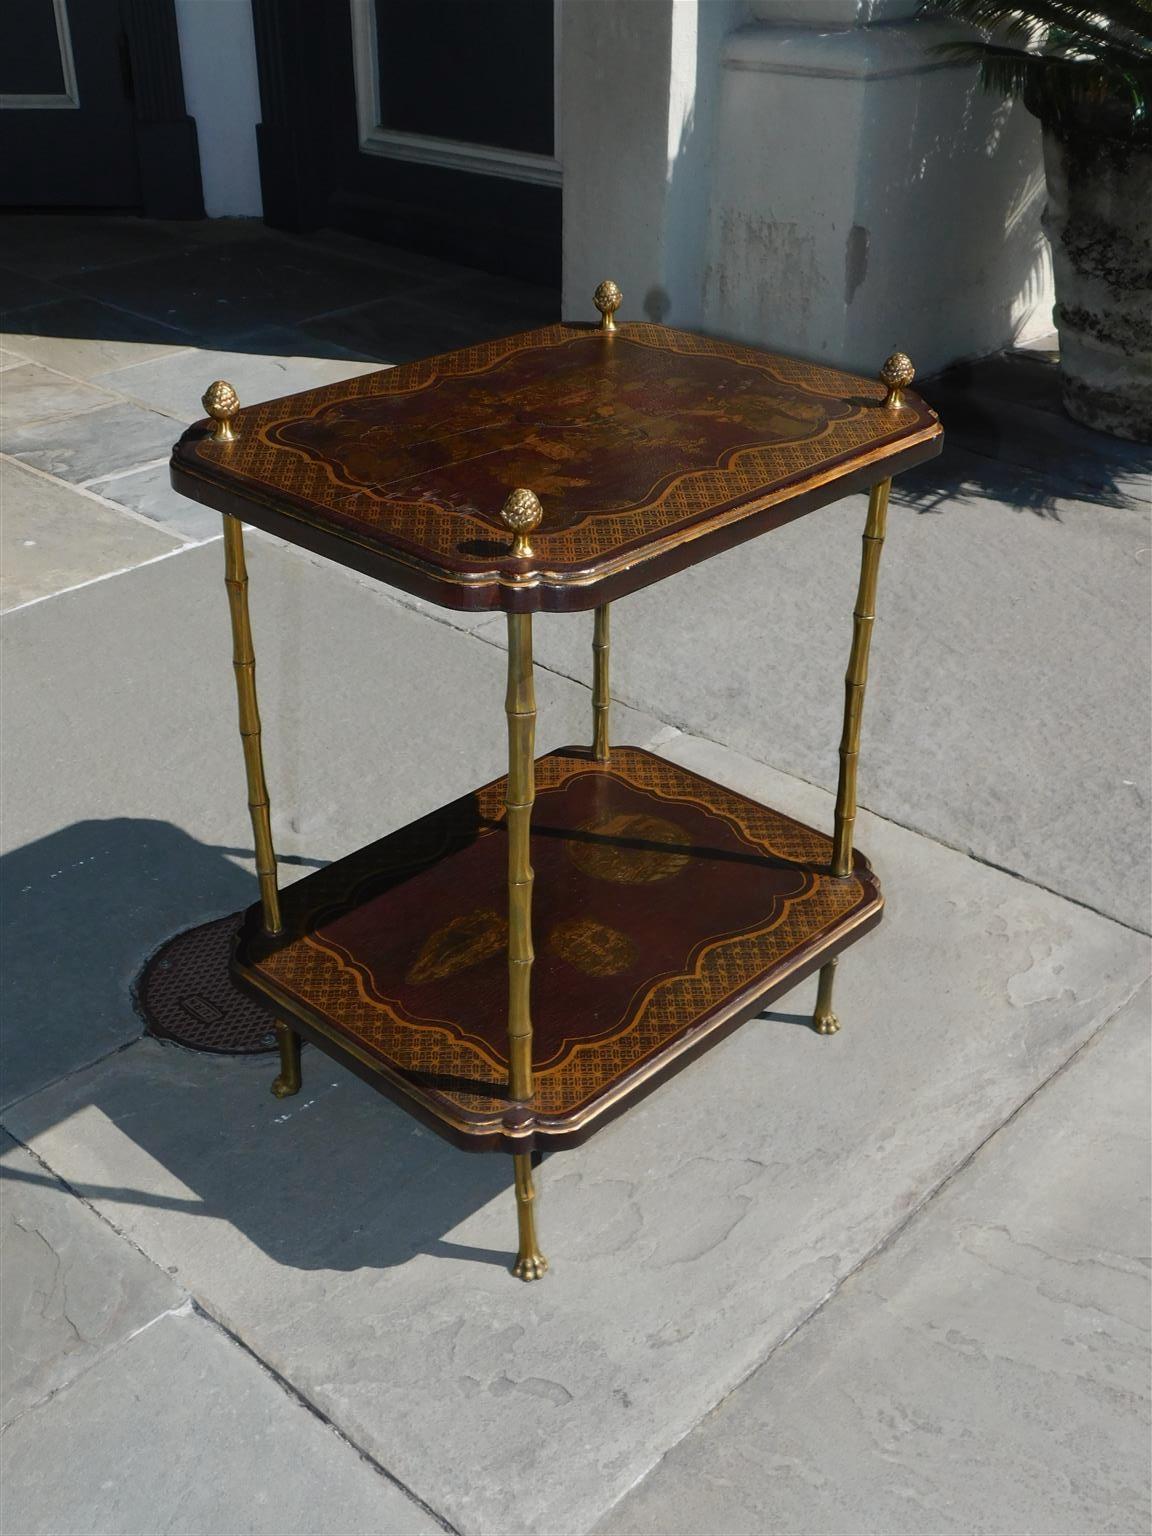 Mid-19th Century English Chinoiserie & Brass Finial Two Tiered Side Table with Claw Feet, C. 1850 For Sale